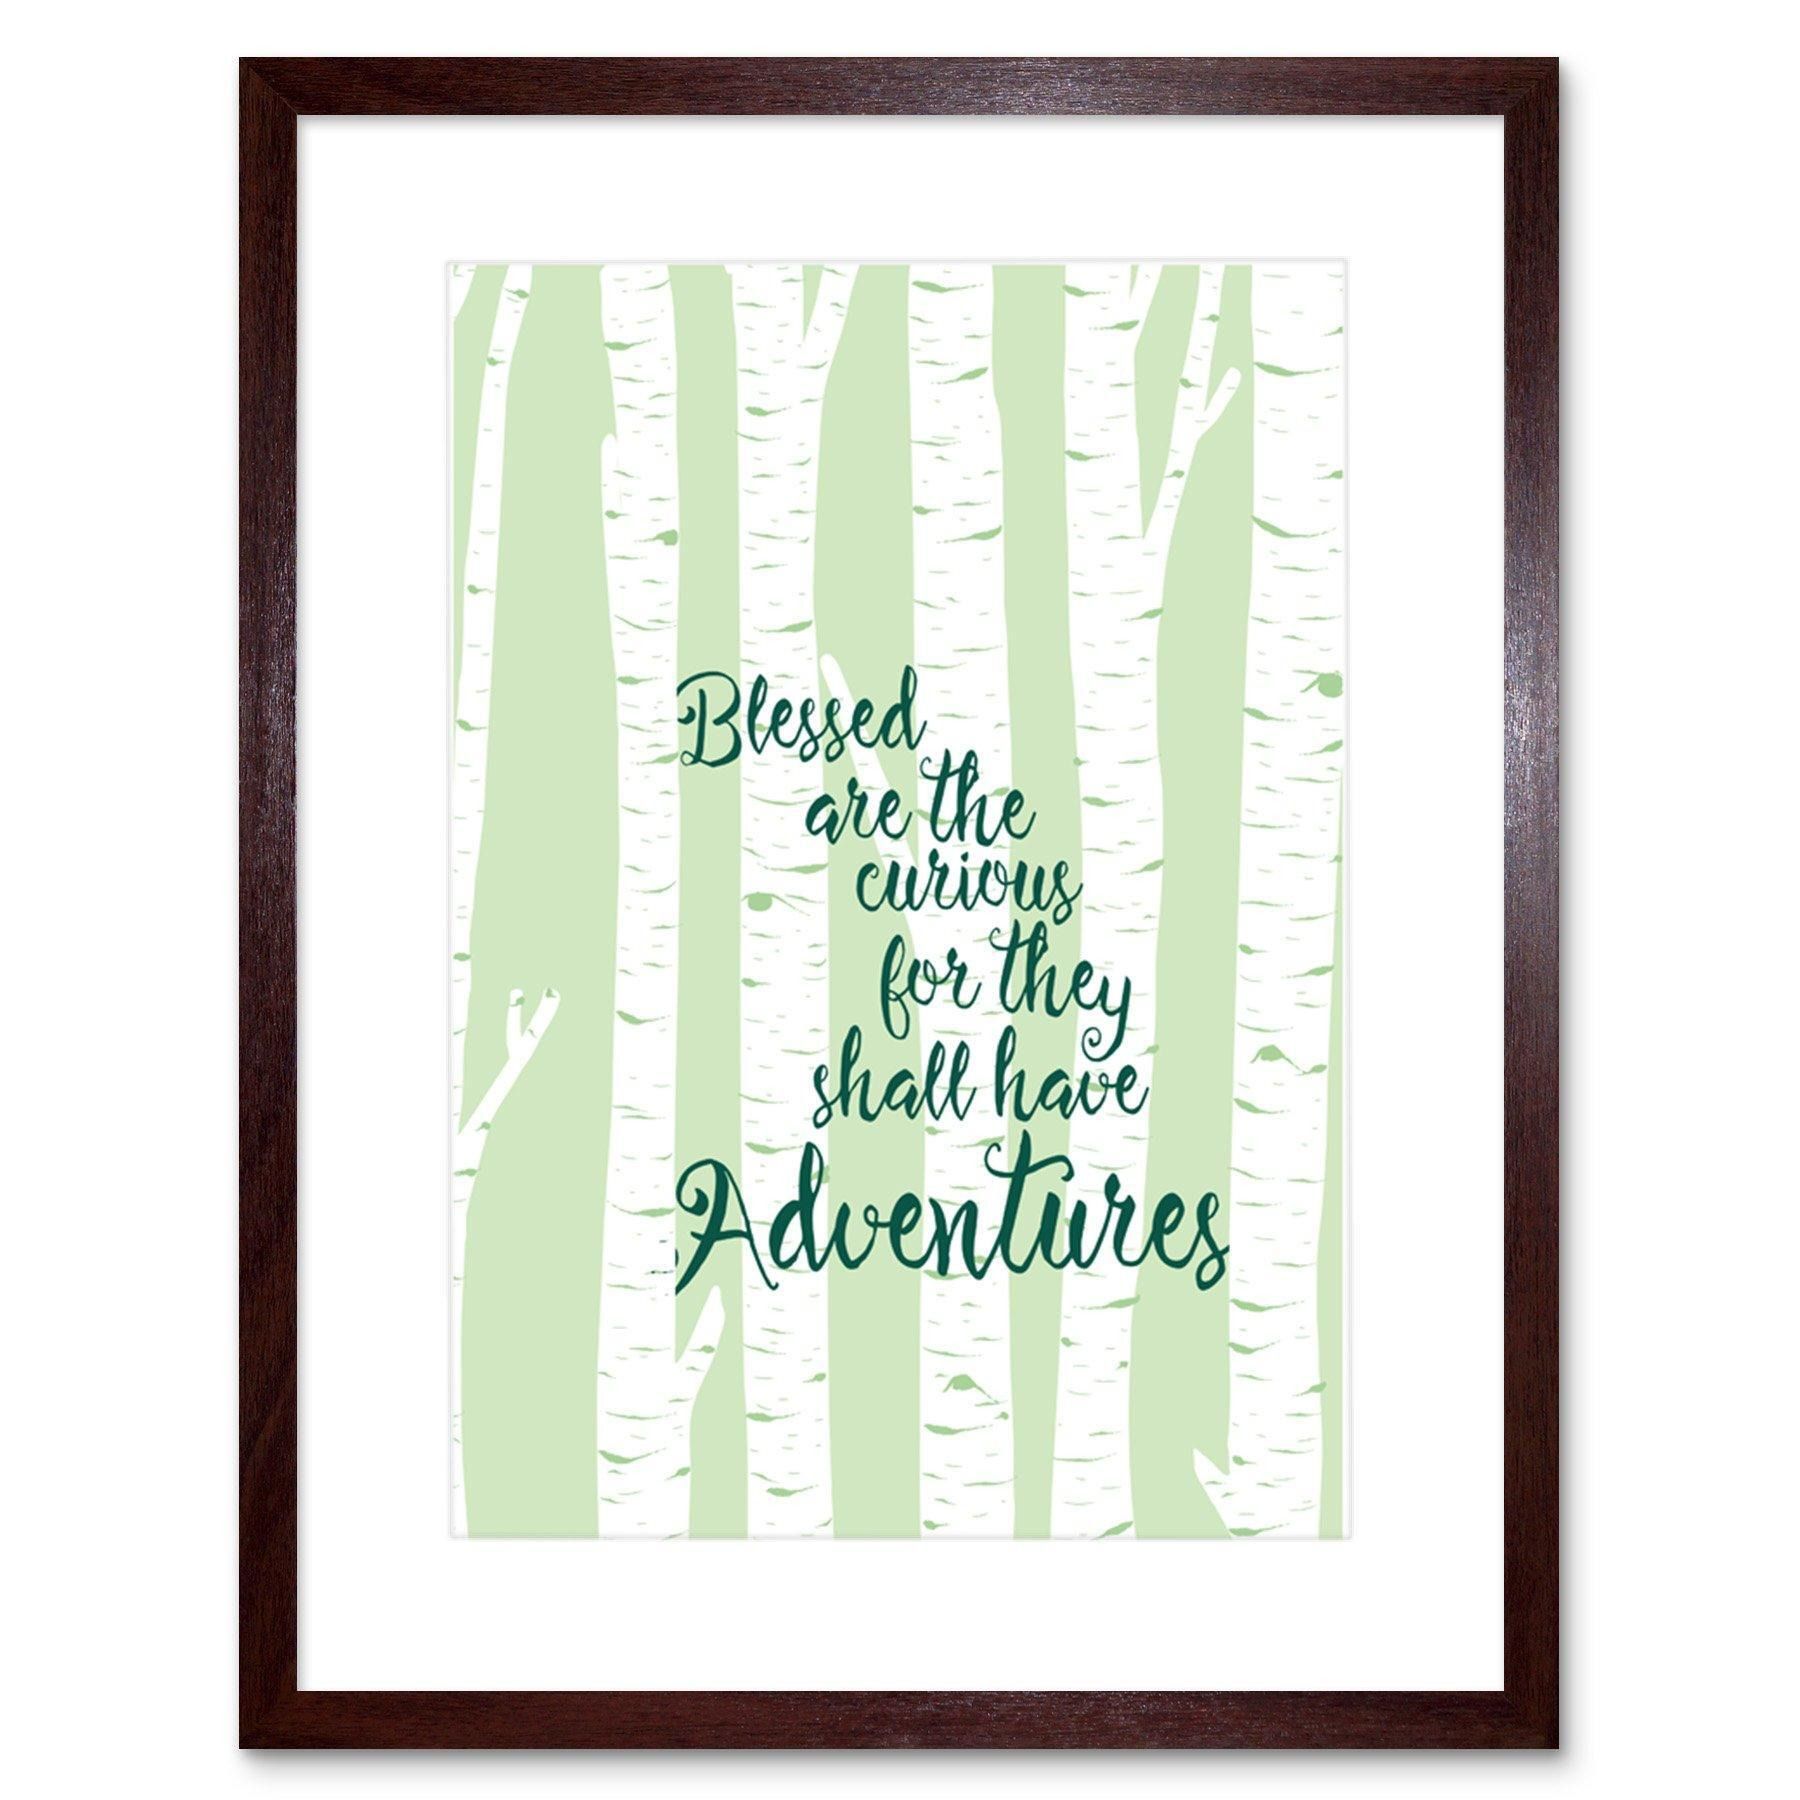 Blessed Curious Adventure Silver Birch Framed Wall Art Print - image 1